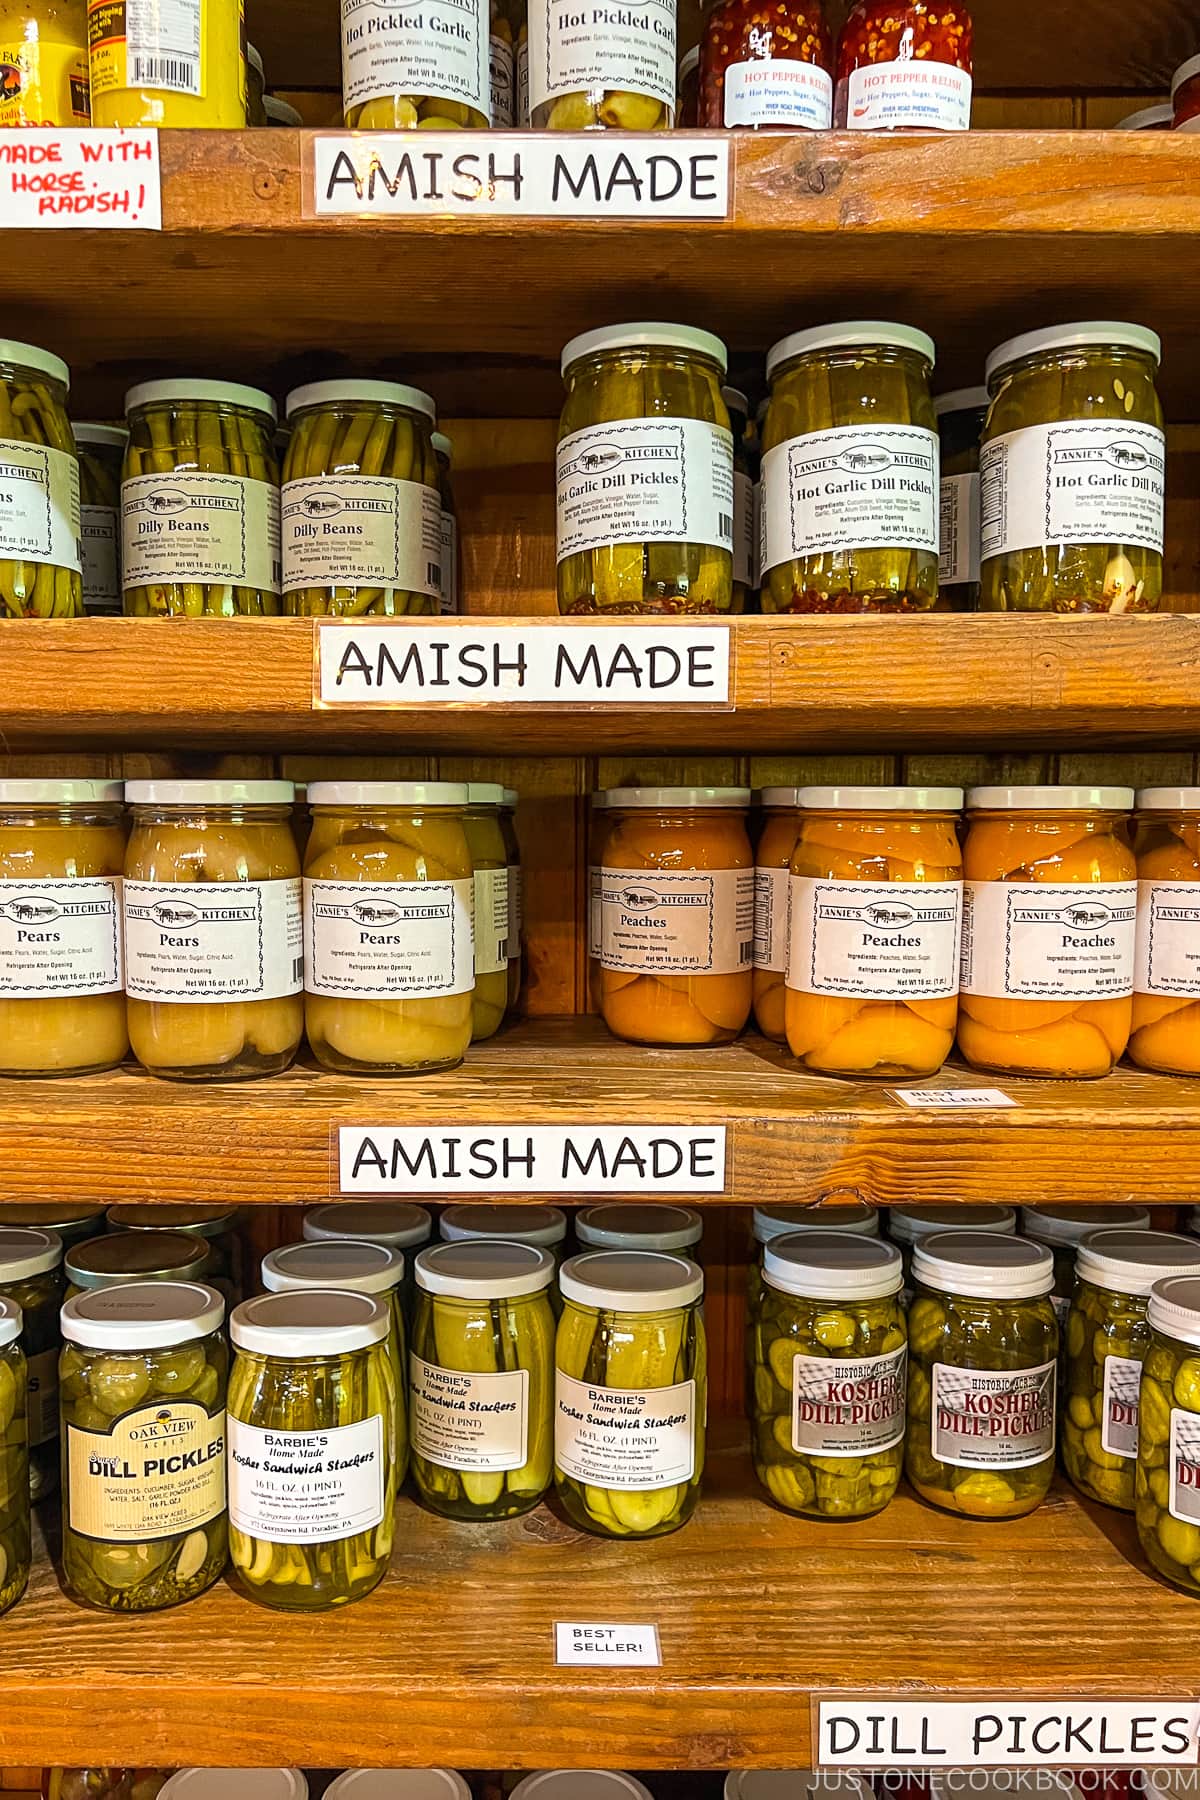 Amish canned goods on shelves